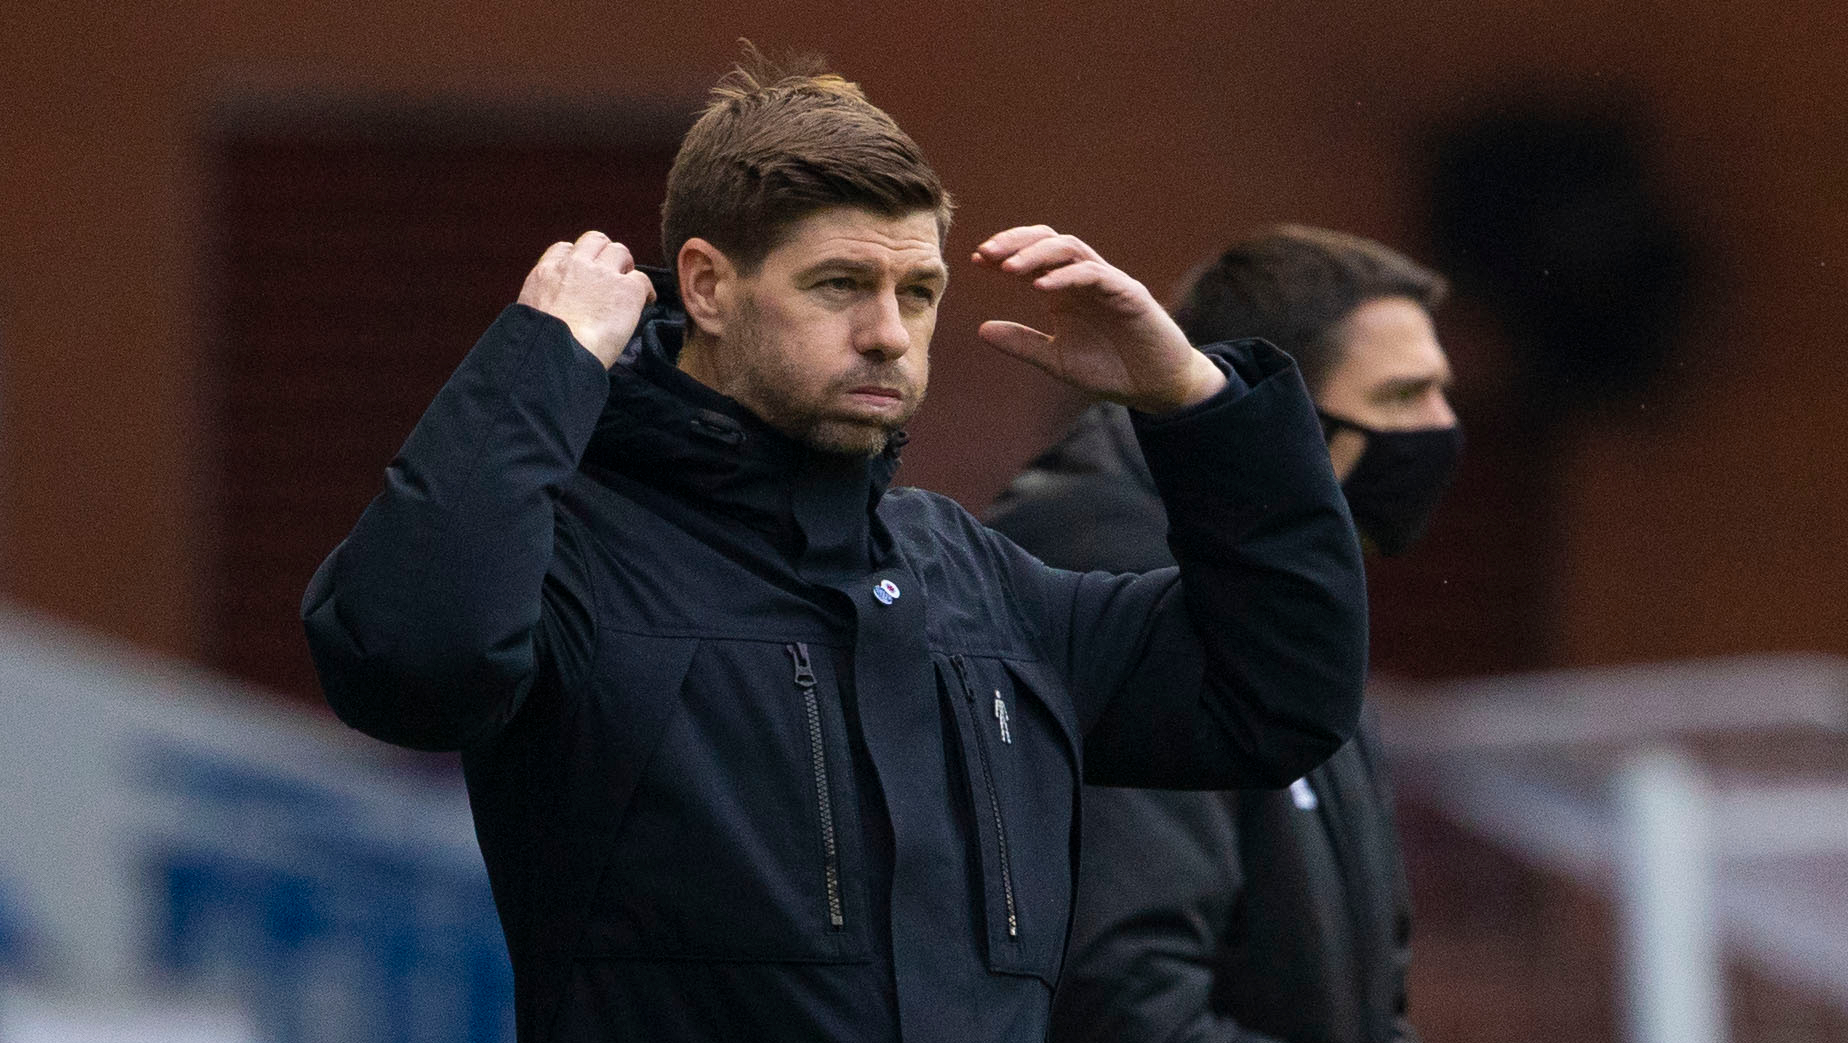 Steven Gerrard is in no rush to leave Rangers, says Dave King.